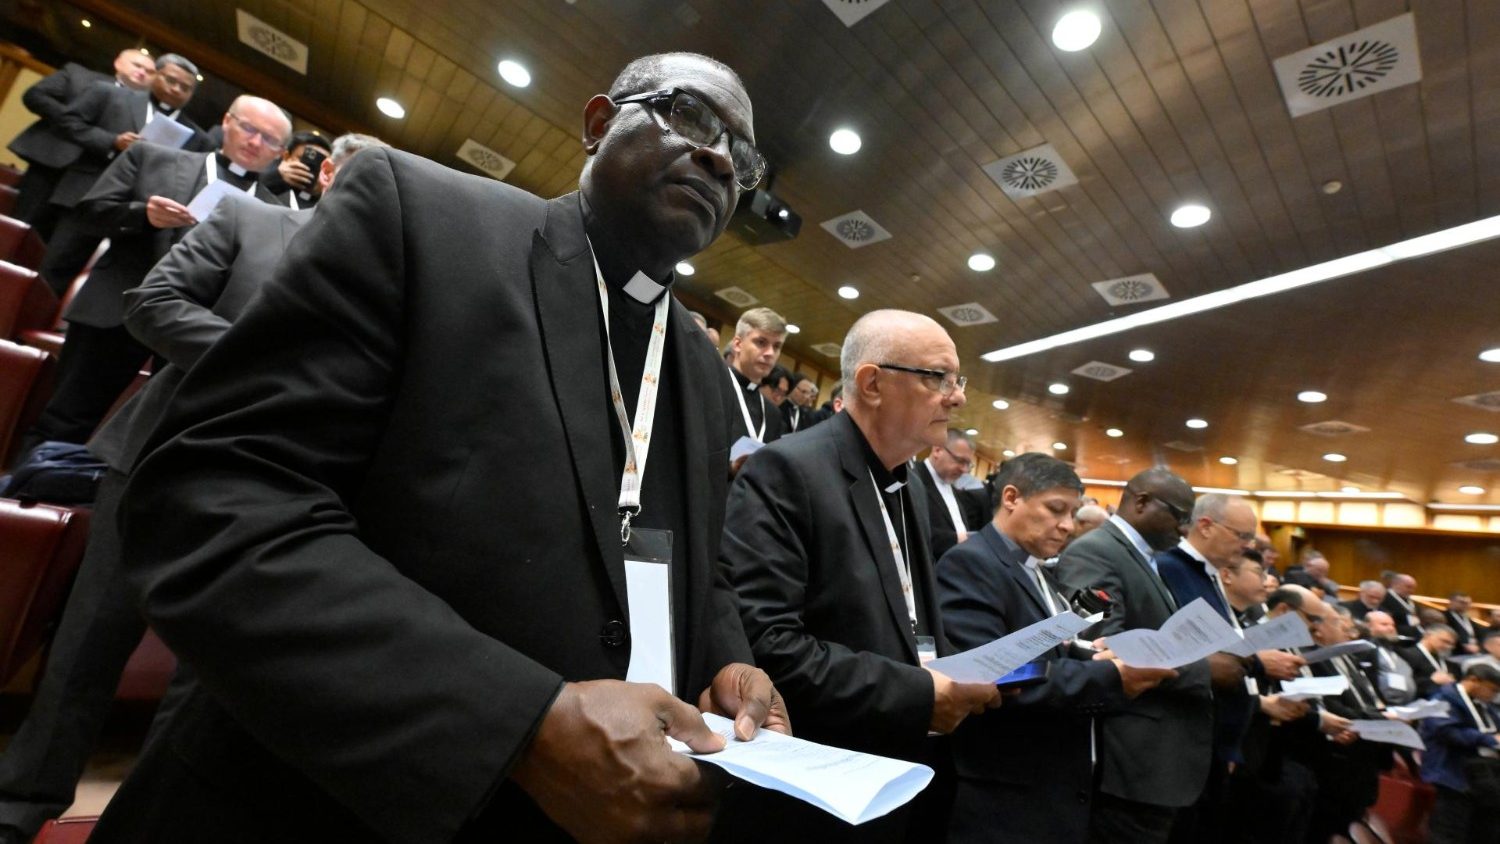 After Rome meeting, parish priests head home as ‘missionaries of synodality'